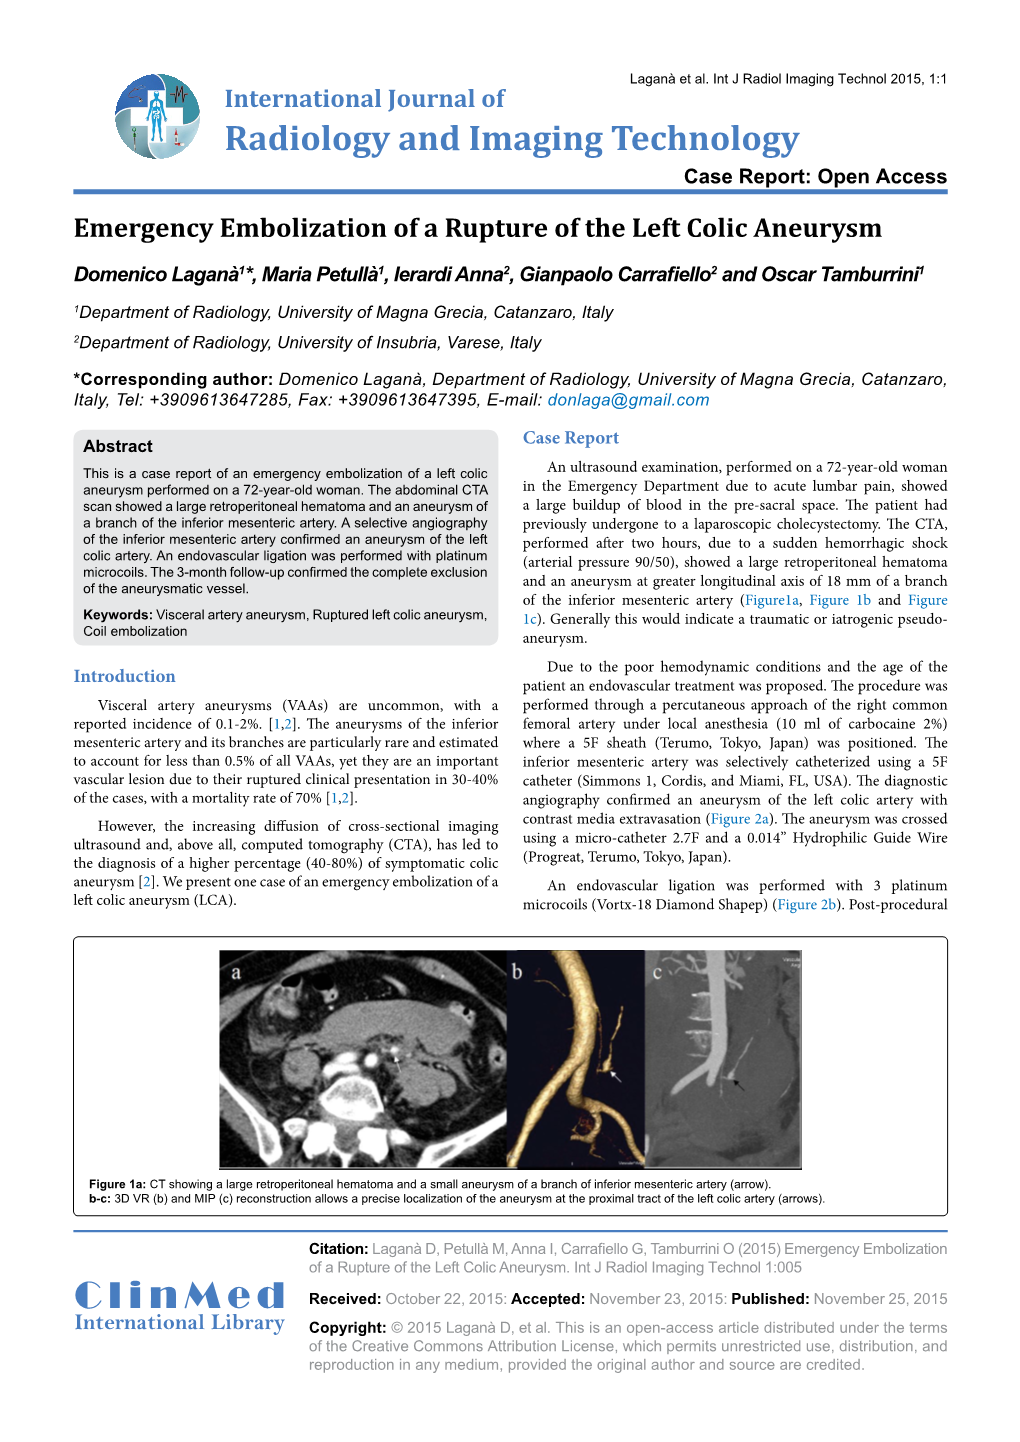 Emergency Embolization of a Rupture of the Left Colic Aneurysm